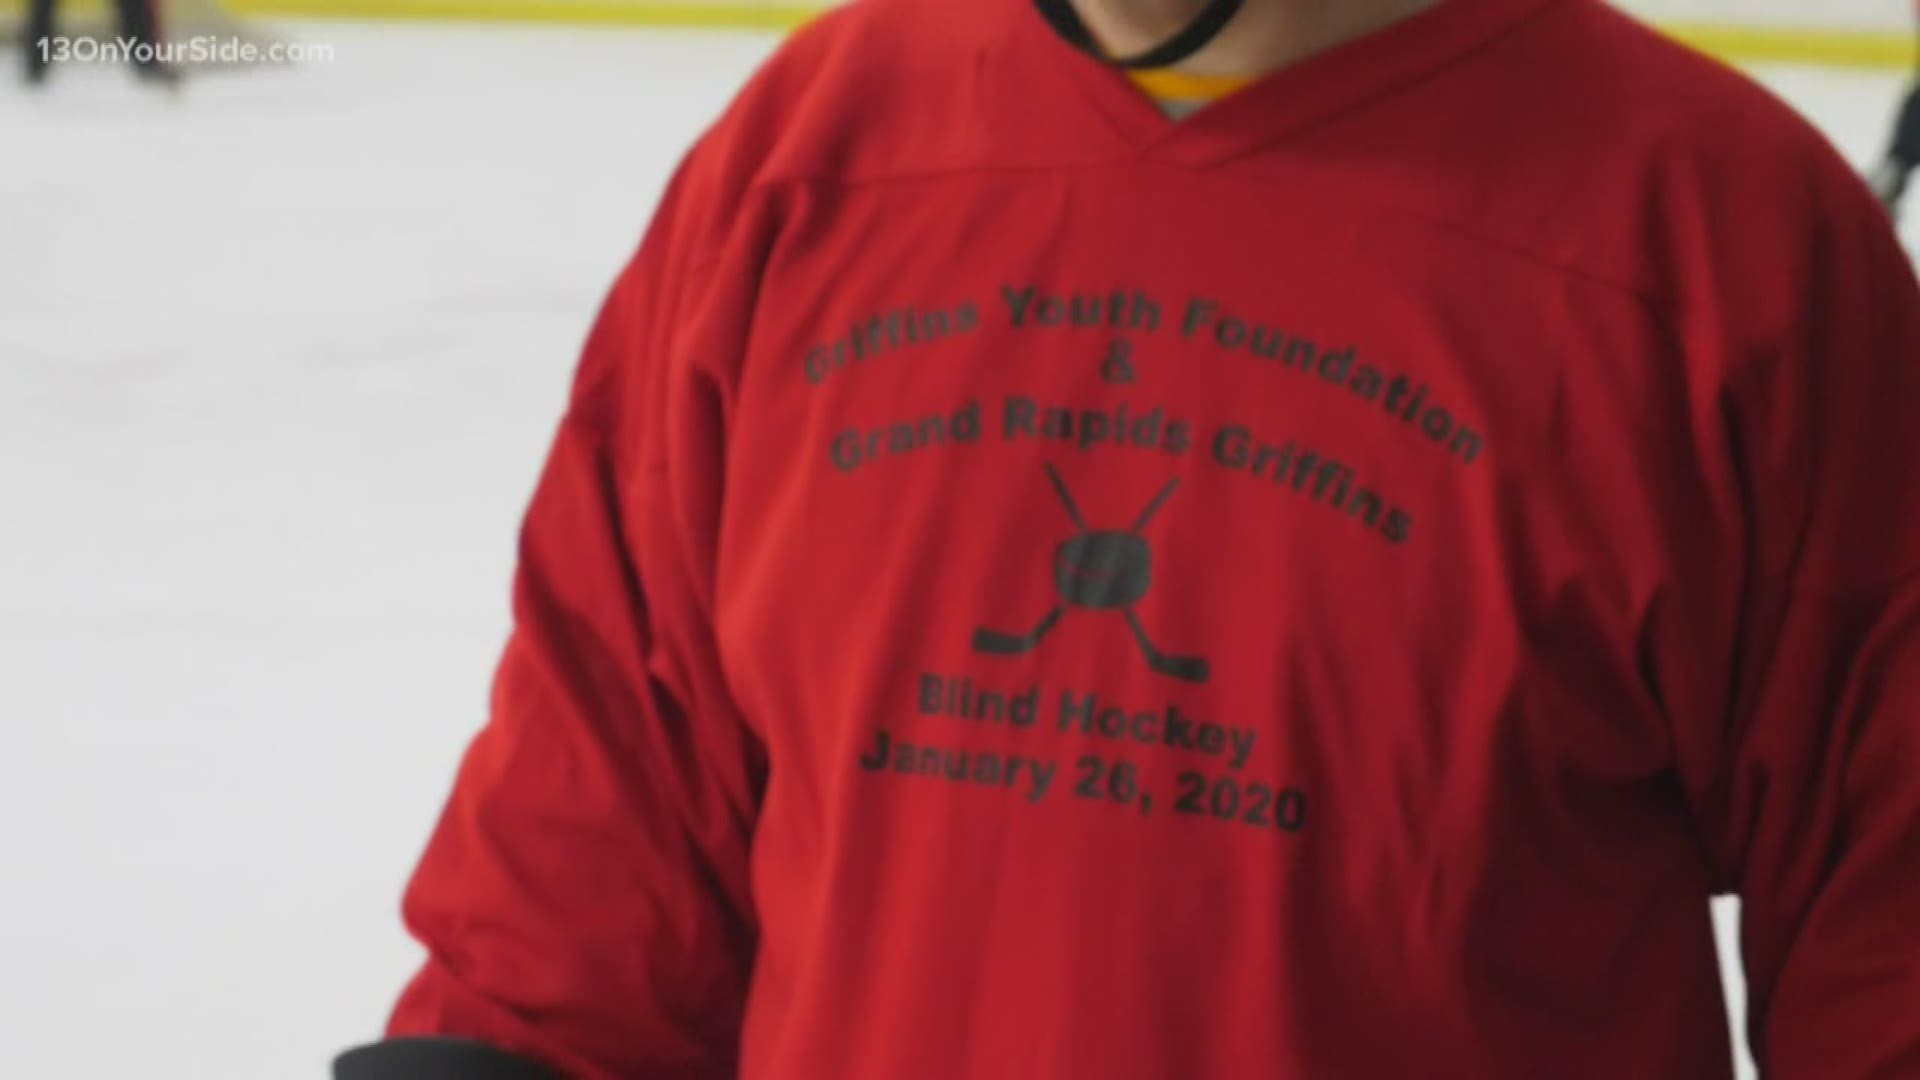 Visually impaired and blind people came to Grand Rapids Sunday, Jan. 26 to take part in a Try Blind Hockey event put on by the Griffins Youth Foundation.